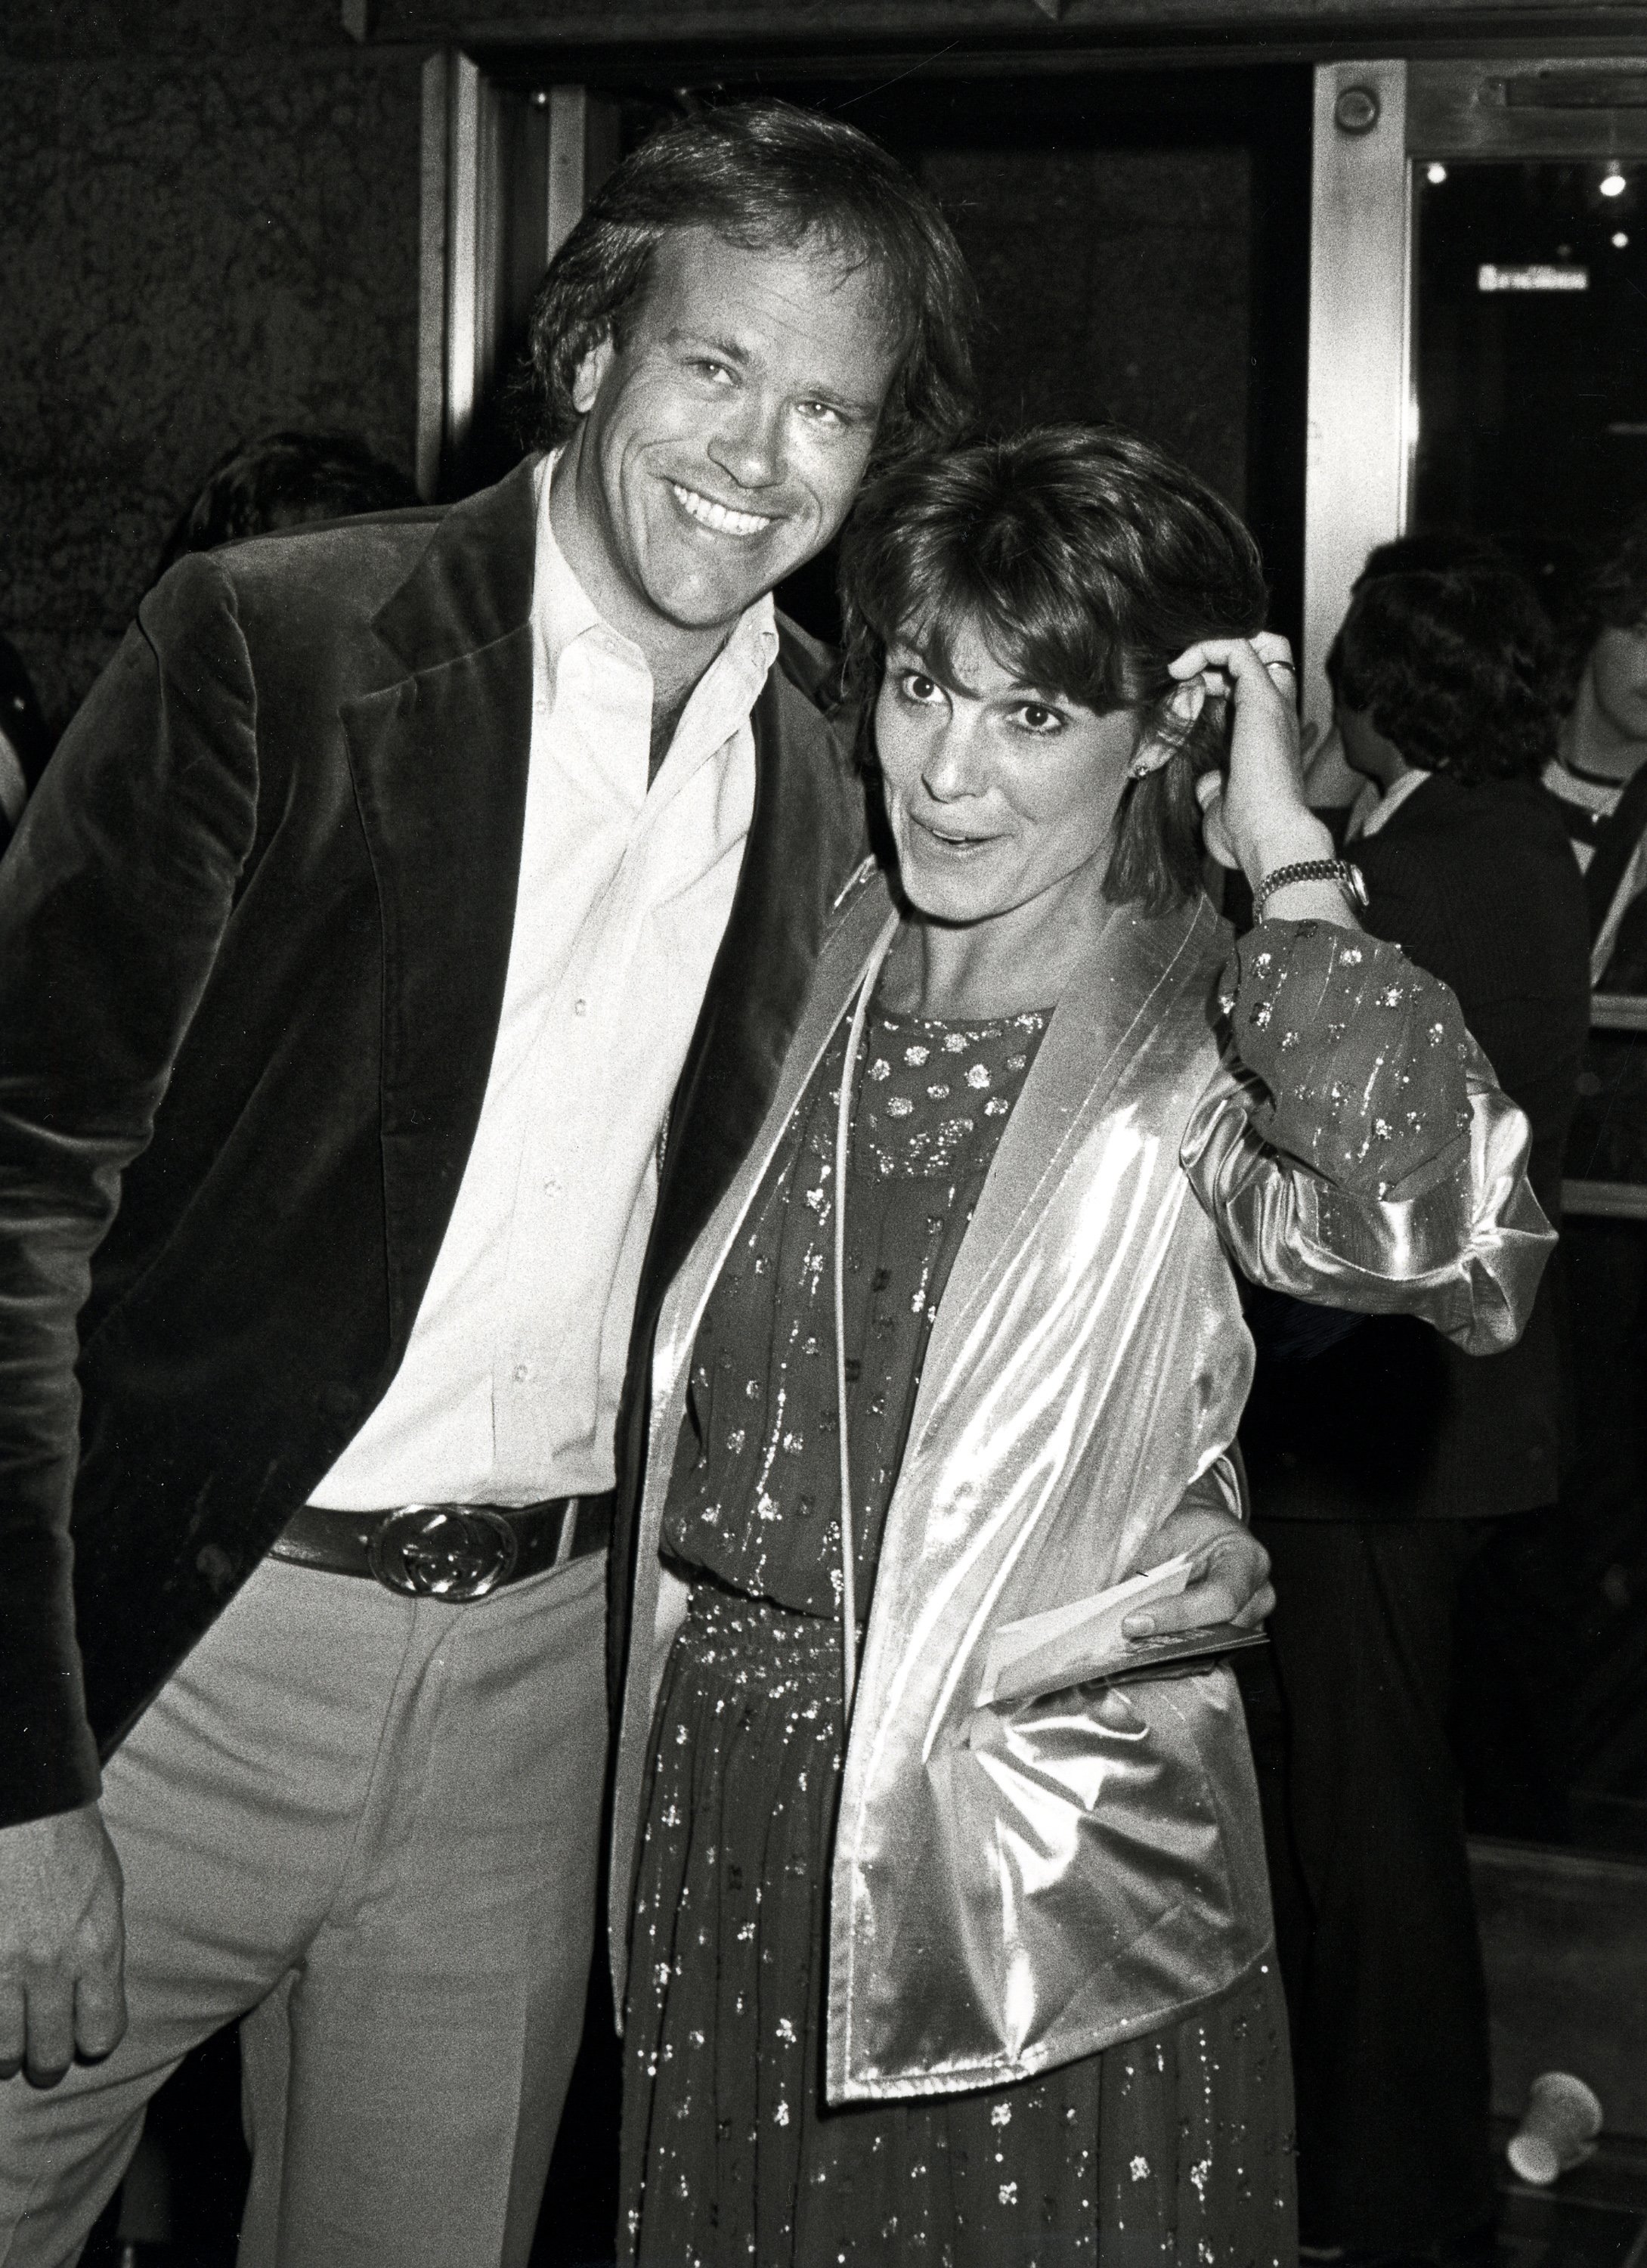 Dick Ebersol and Susan Saint James during party honoring "Saturday Night Live" and Olivia Newton-John - May 22, 1982 at Radio City Music Hall in New York City, New York. Photo: Getty Images